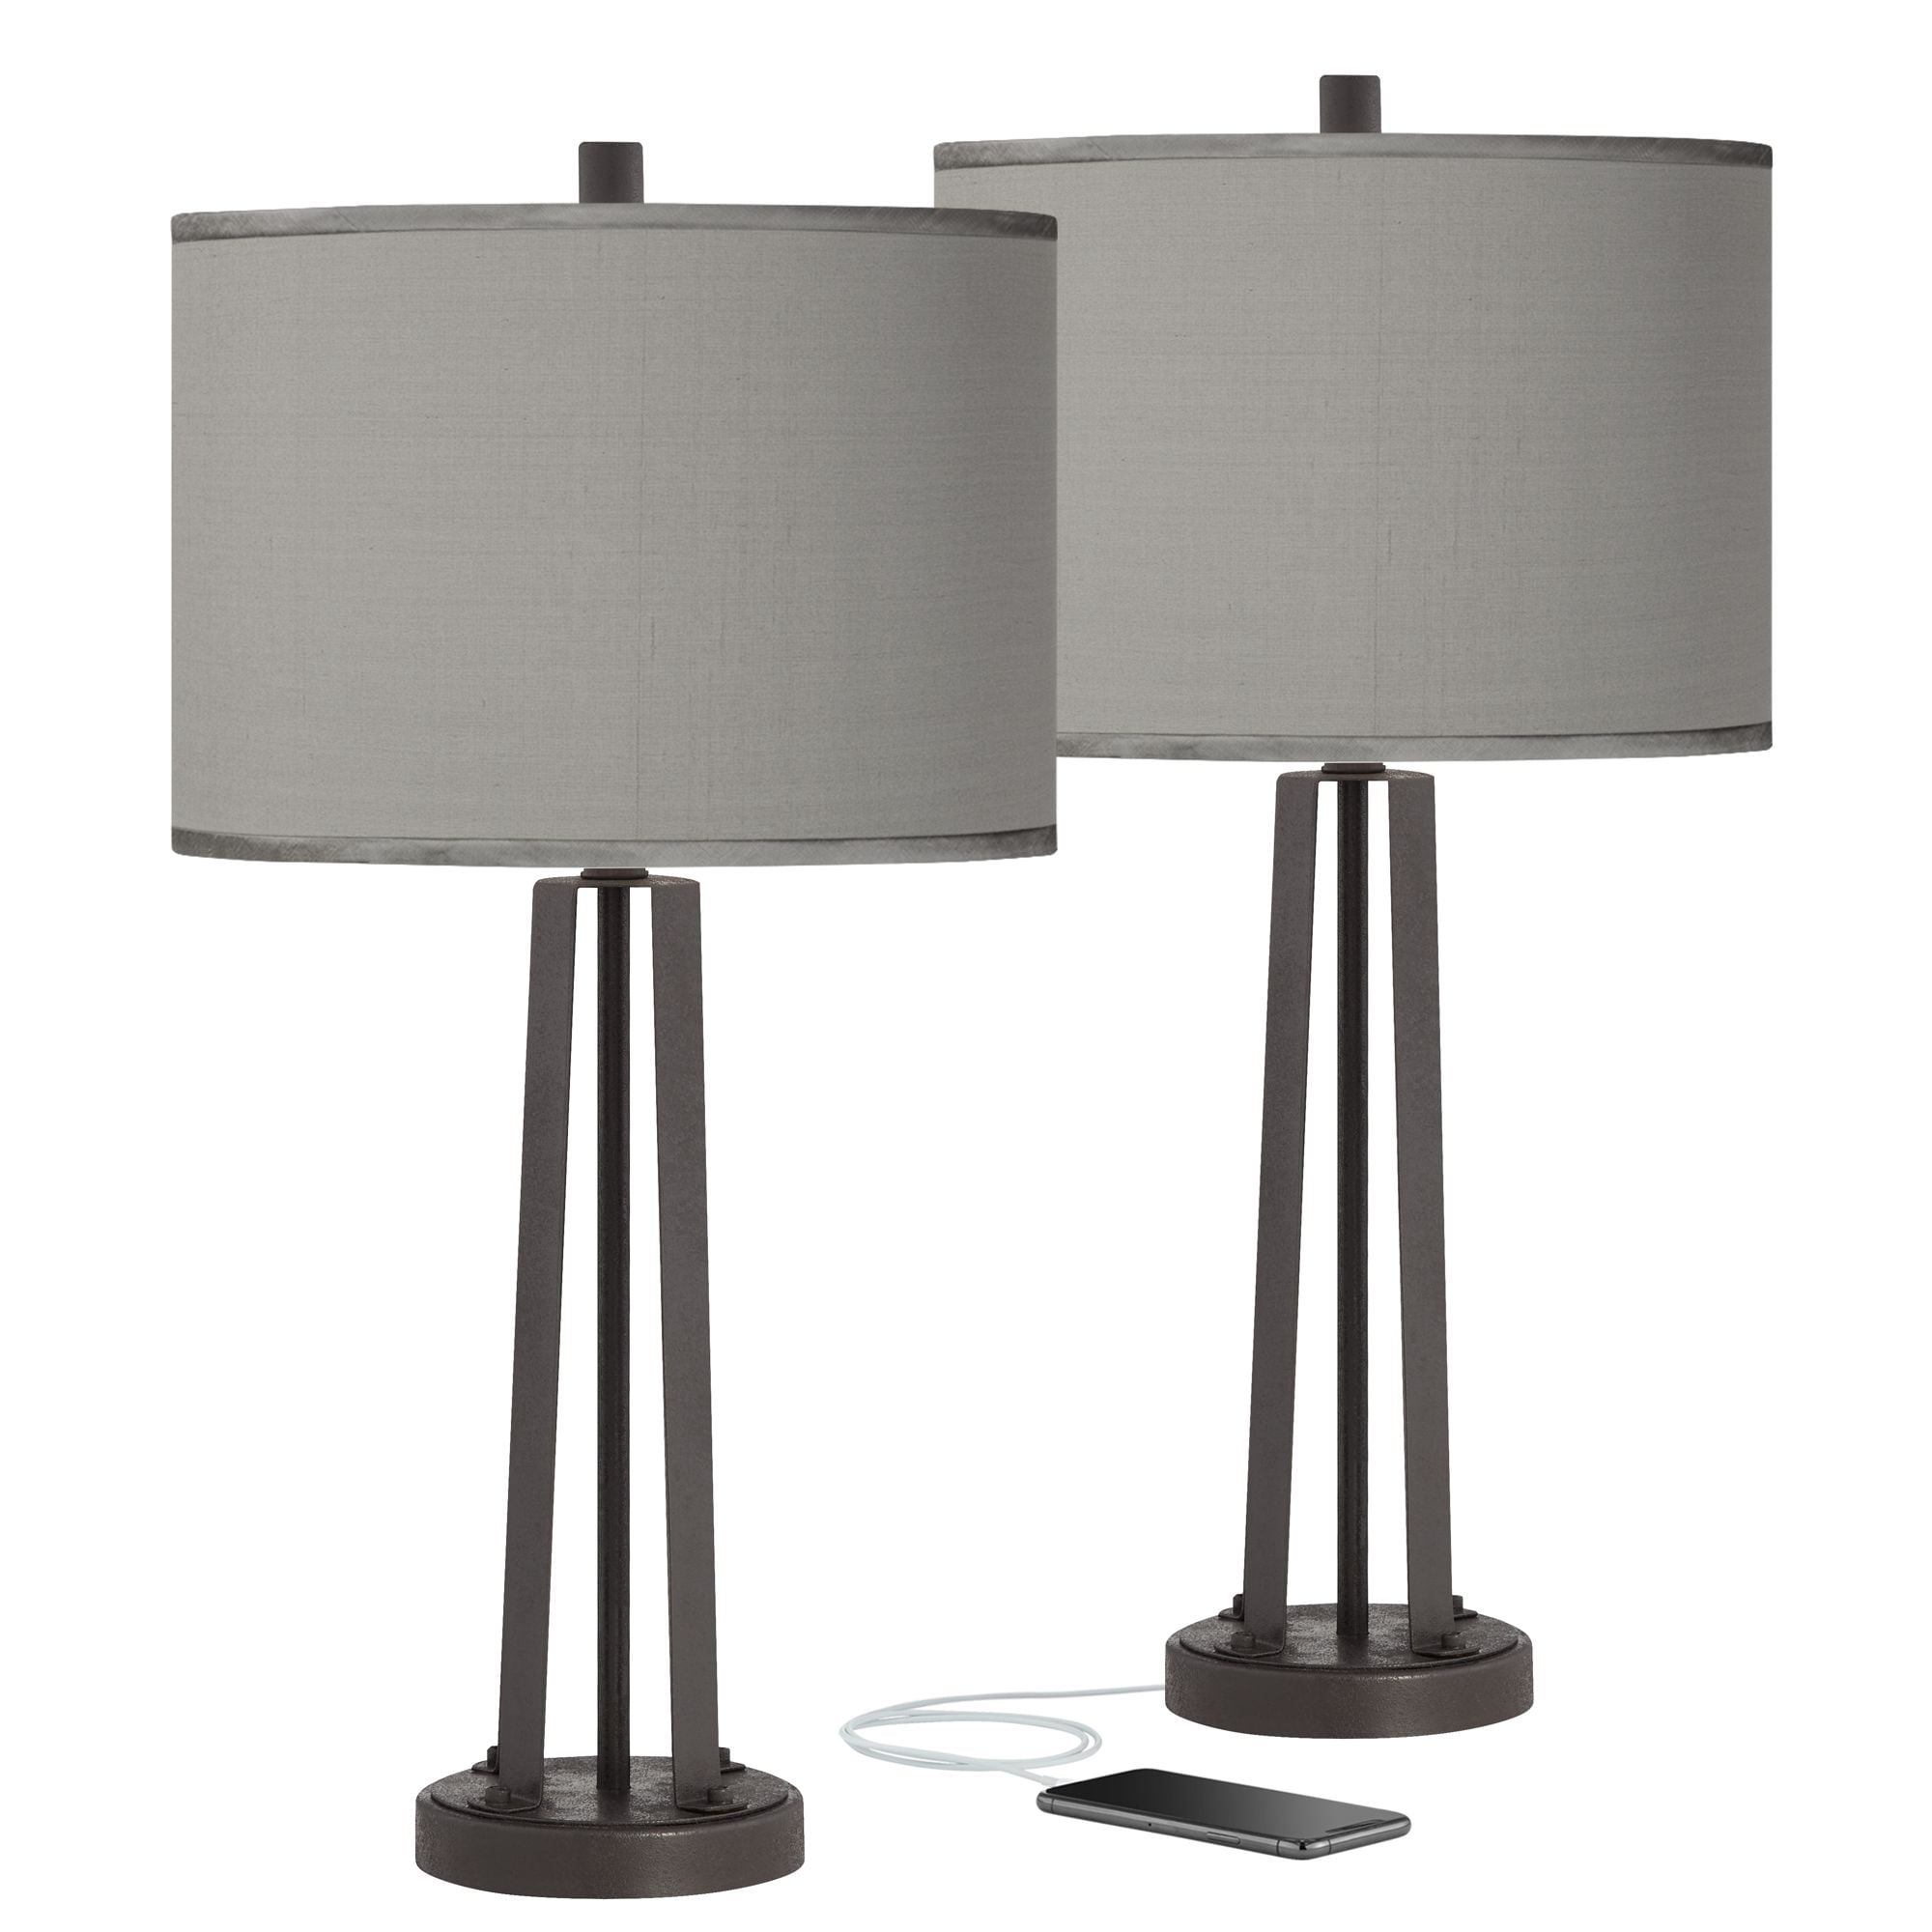 Possini Euro Design Modern Contemporary Table Lamps Set of 2 with USB Charging Port Base Black Bronze Cream Faux Silk Drum Shade for Living Room Bedroom House Bedside Nightstand Home Office Family